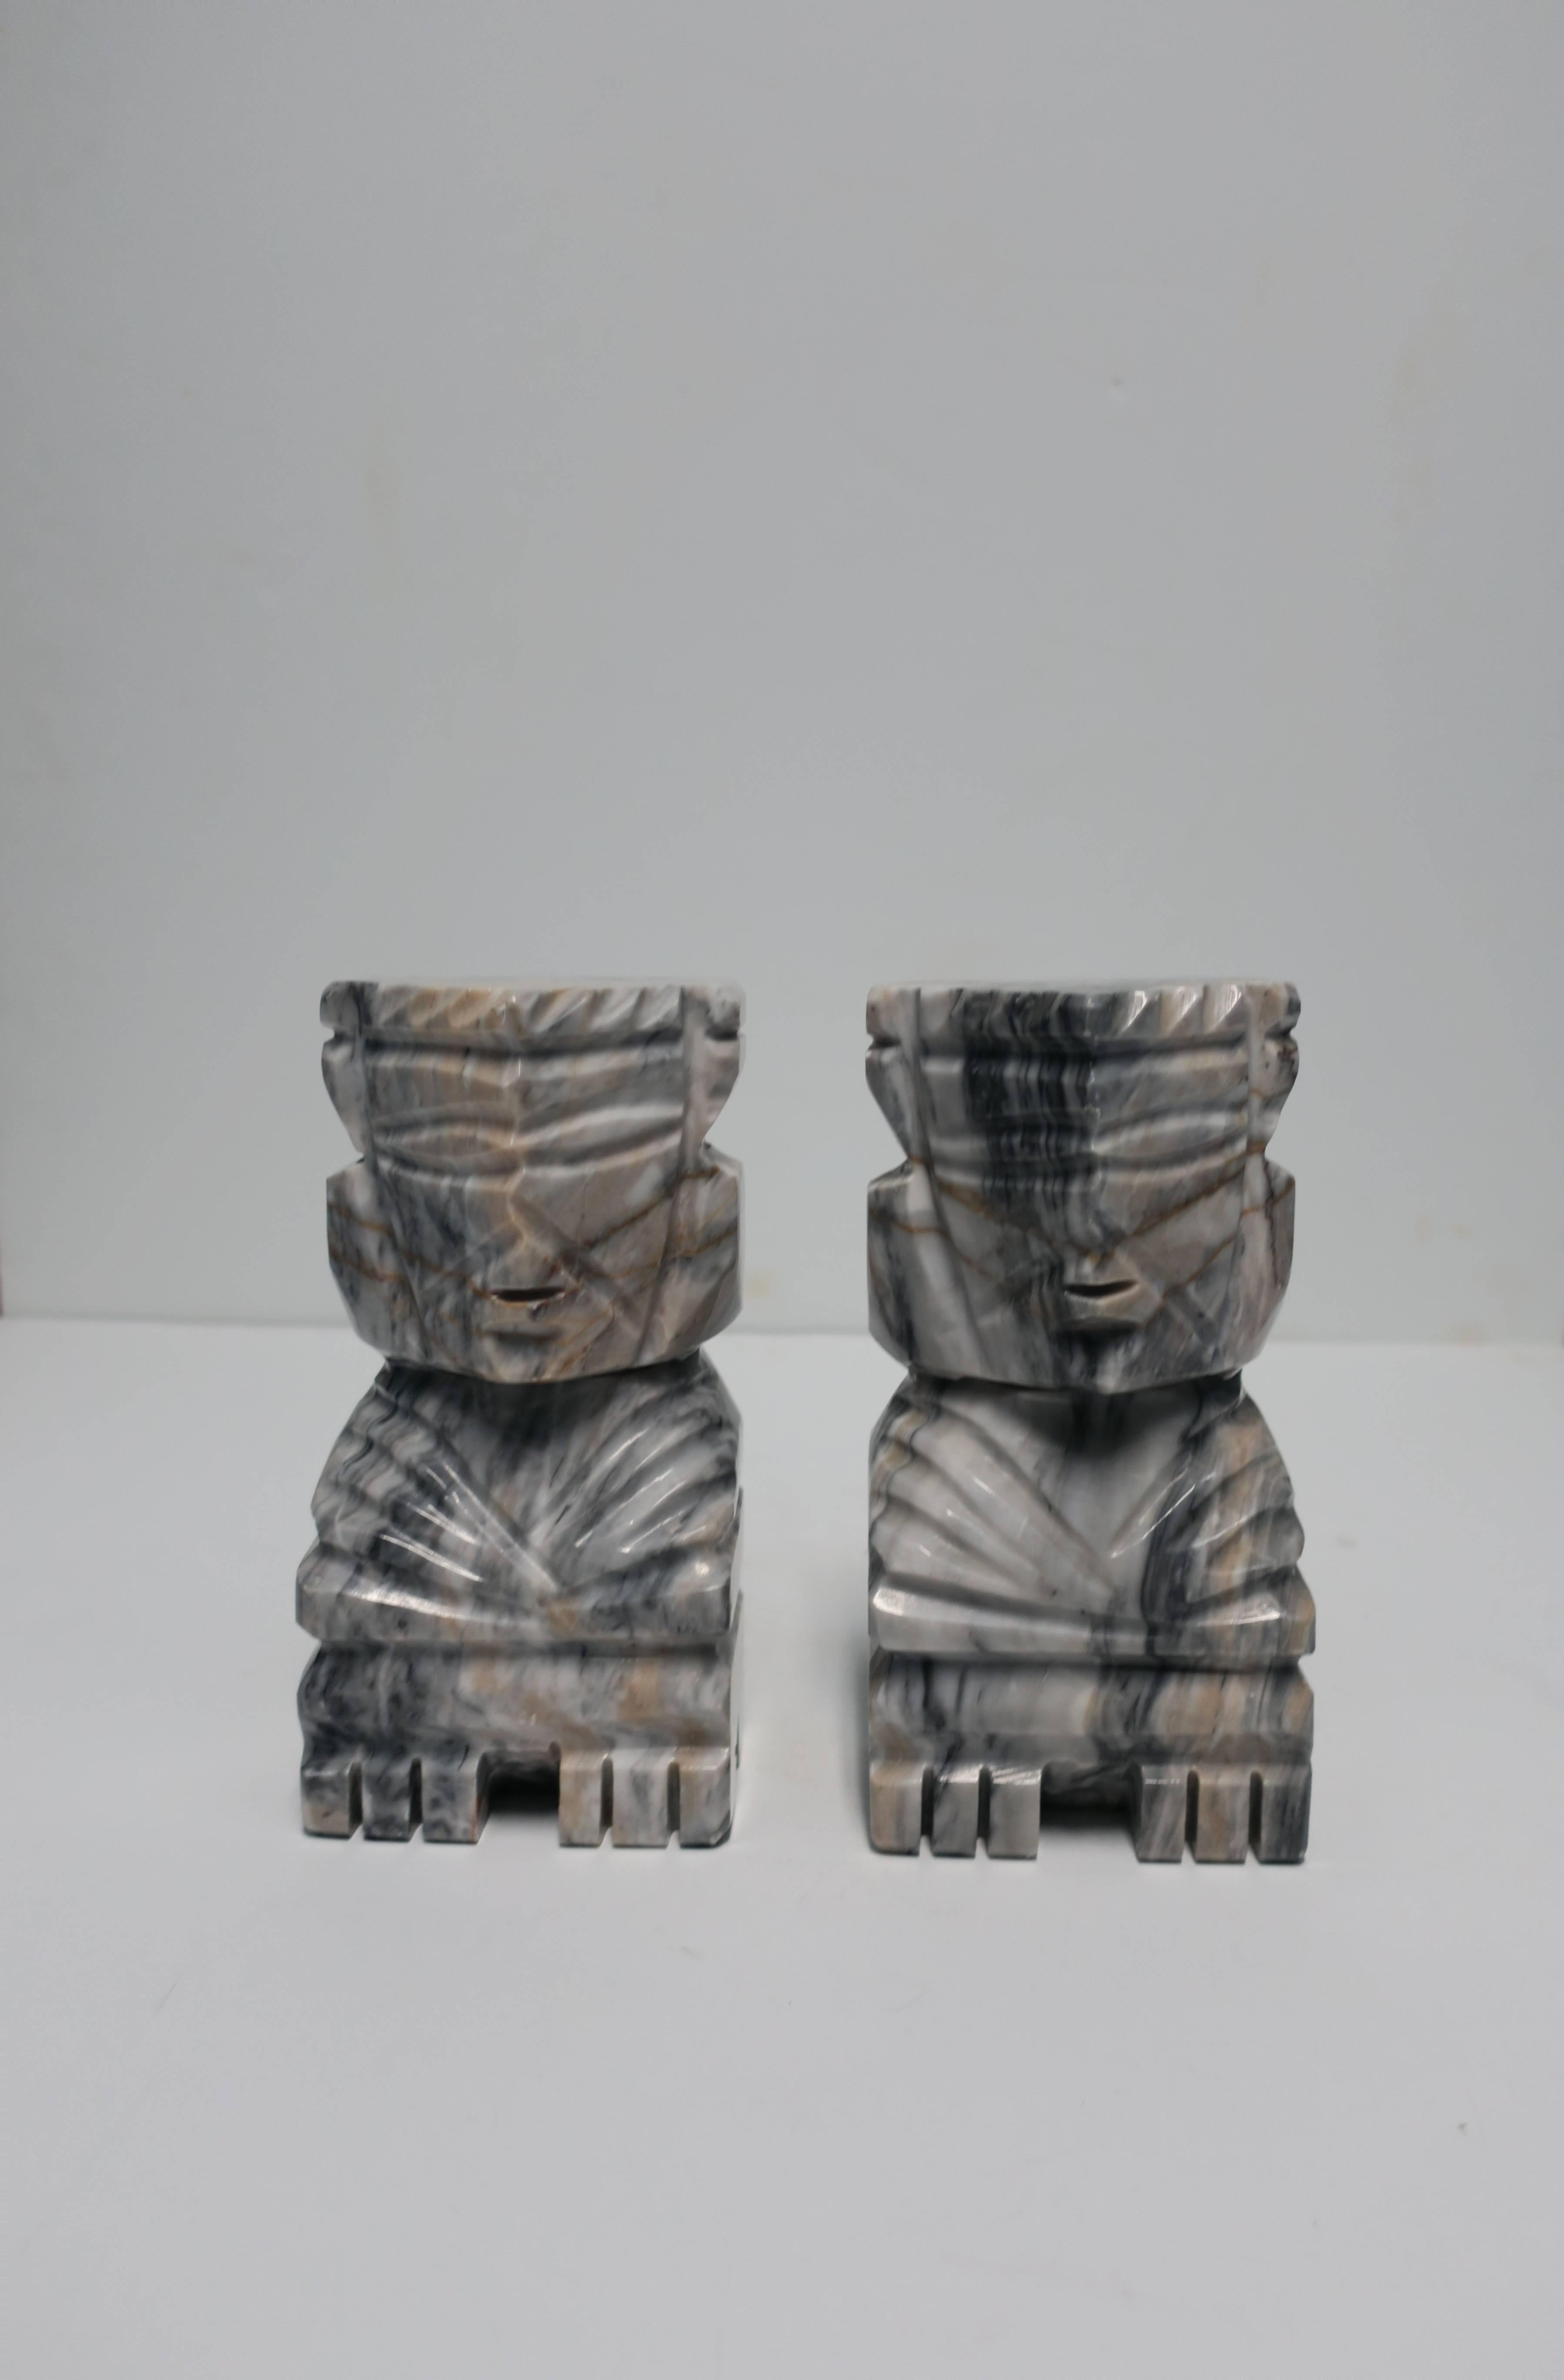 A substantial pair of tall, carved, tribal marble bookends, sculptures, or decorative objects, circa 1970s. Marble is white, black, grey, and tan. Demonstrated as bookends in images #9 and 10. Measuring 8